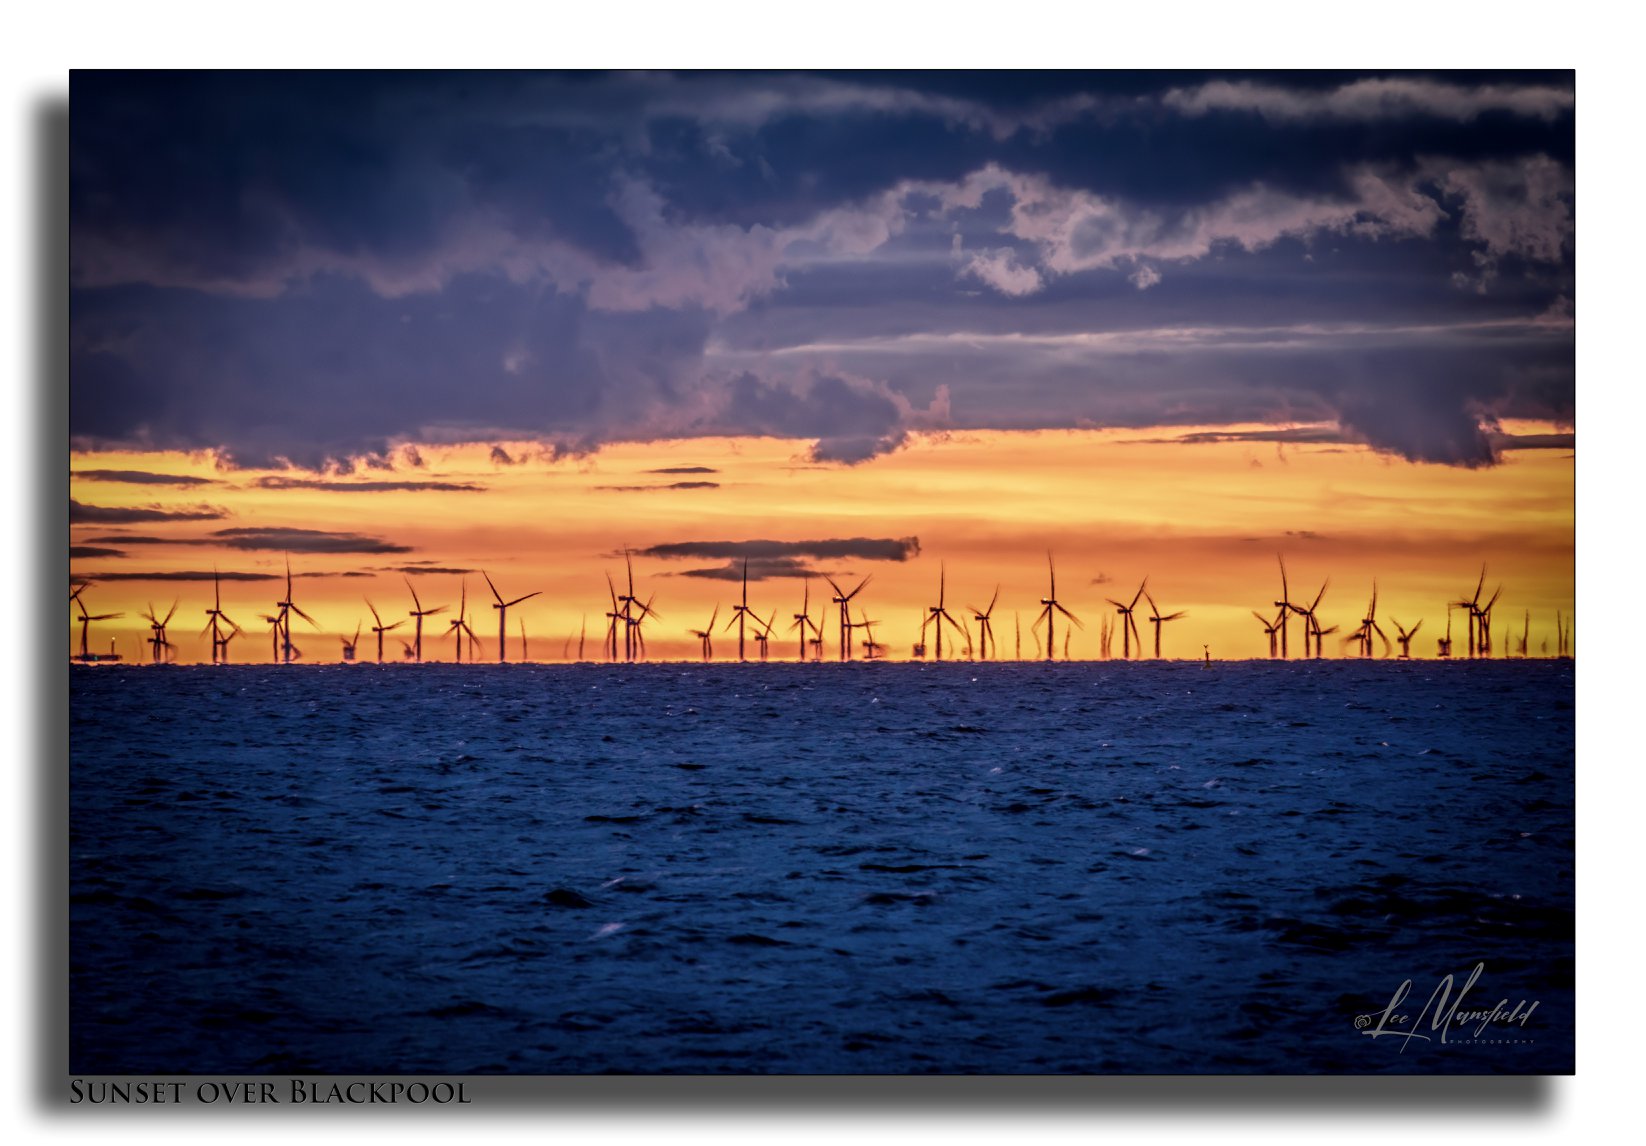 Windfarms at Sunset northern end of Blackpool seafront.